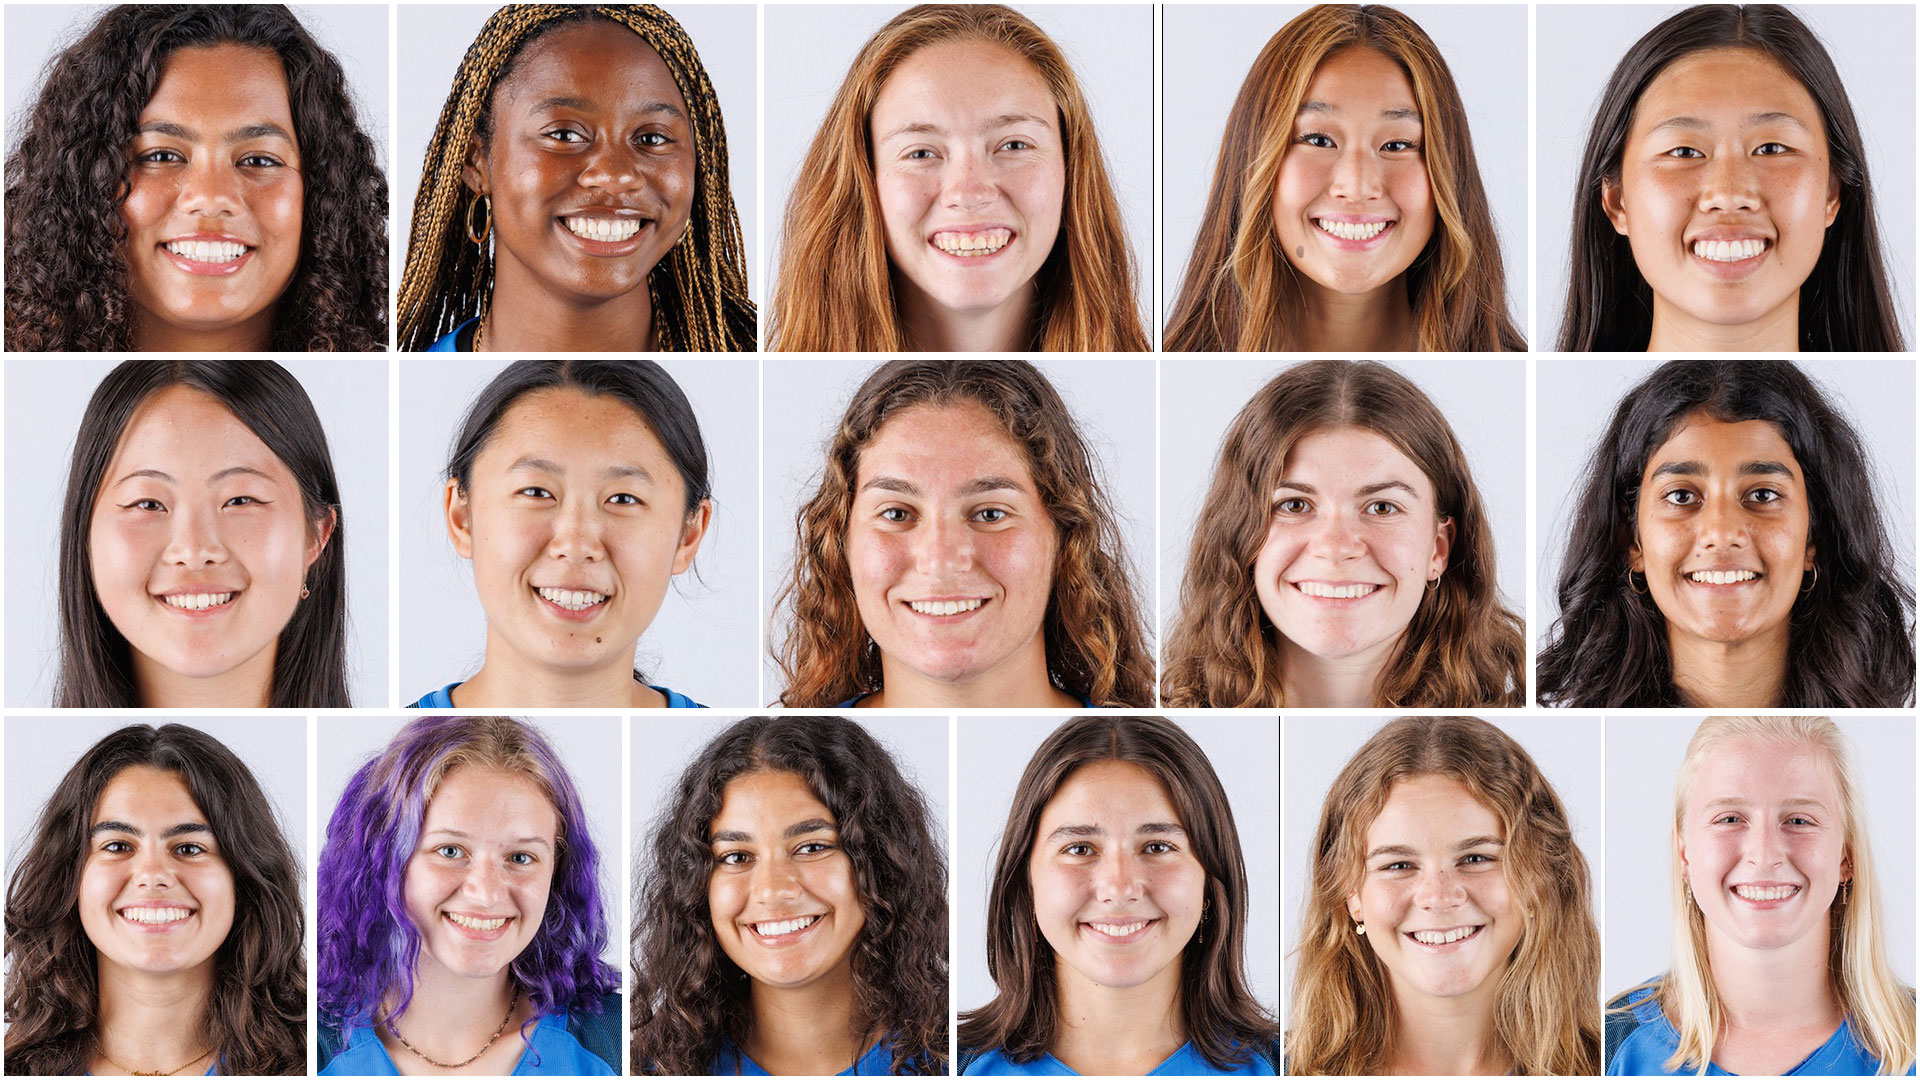 Photos of 16 Academic All-Conference Soccer Players